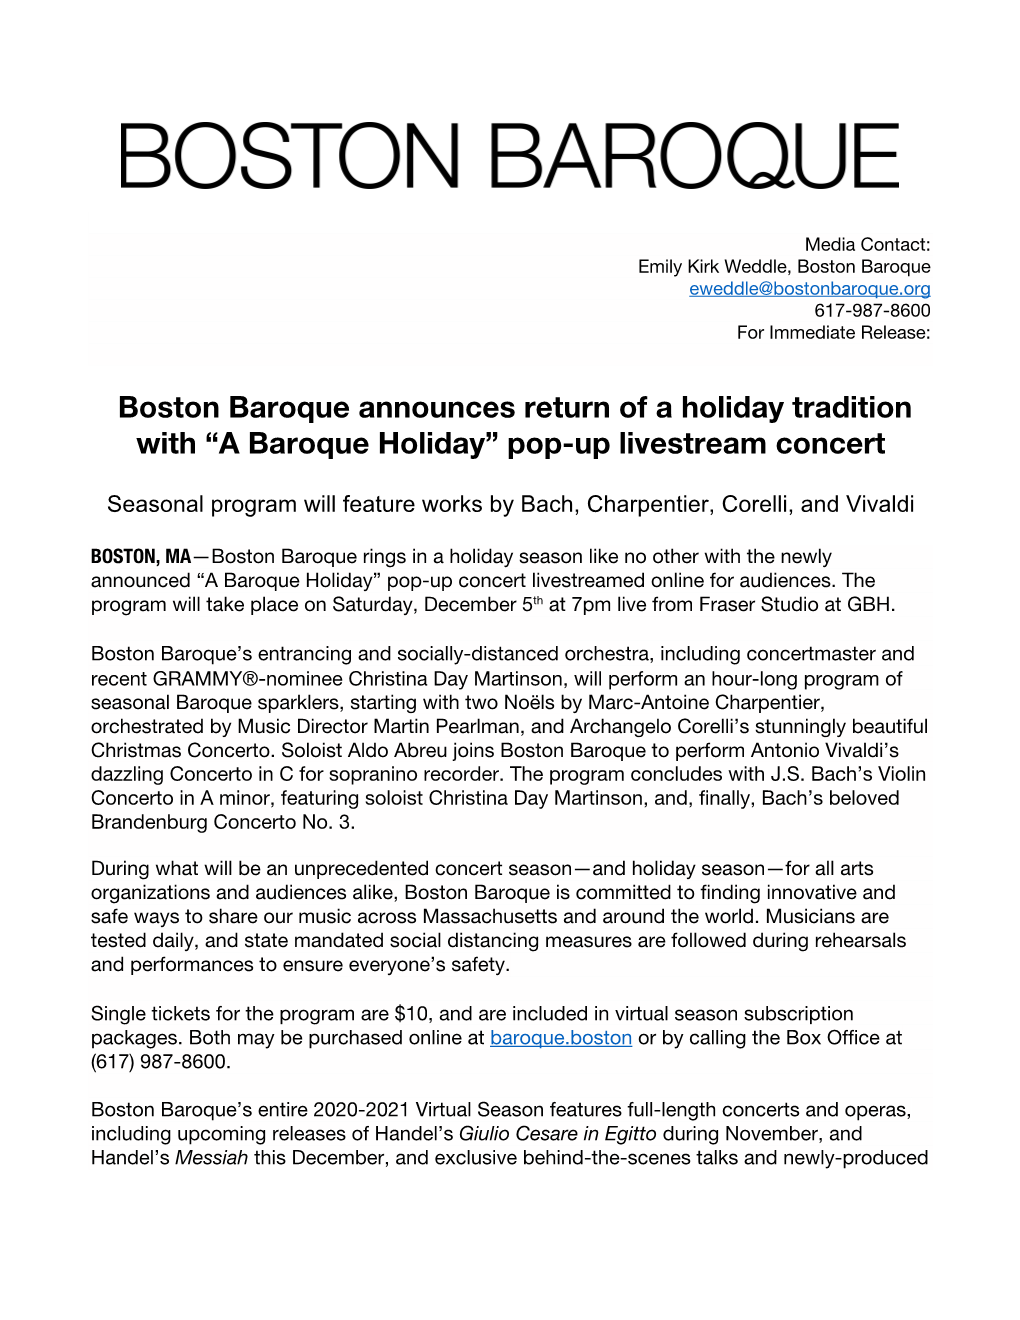 Boston Baroque Announces Return of a Holiday Tradition with “A Baroque Holiday” Pop-Up Livestream Concert